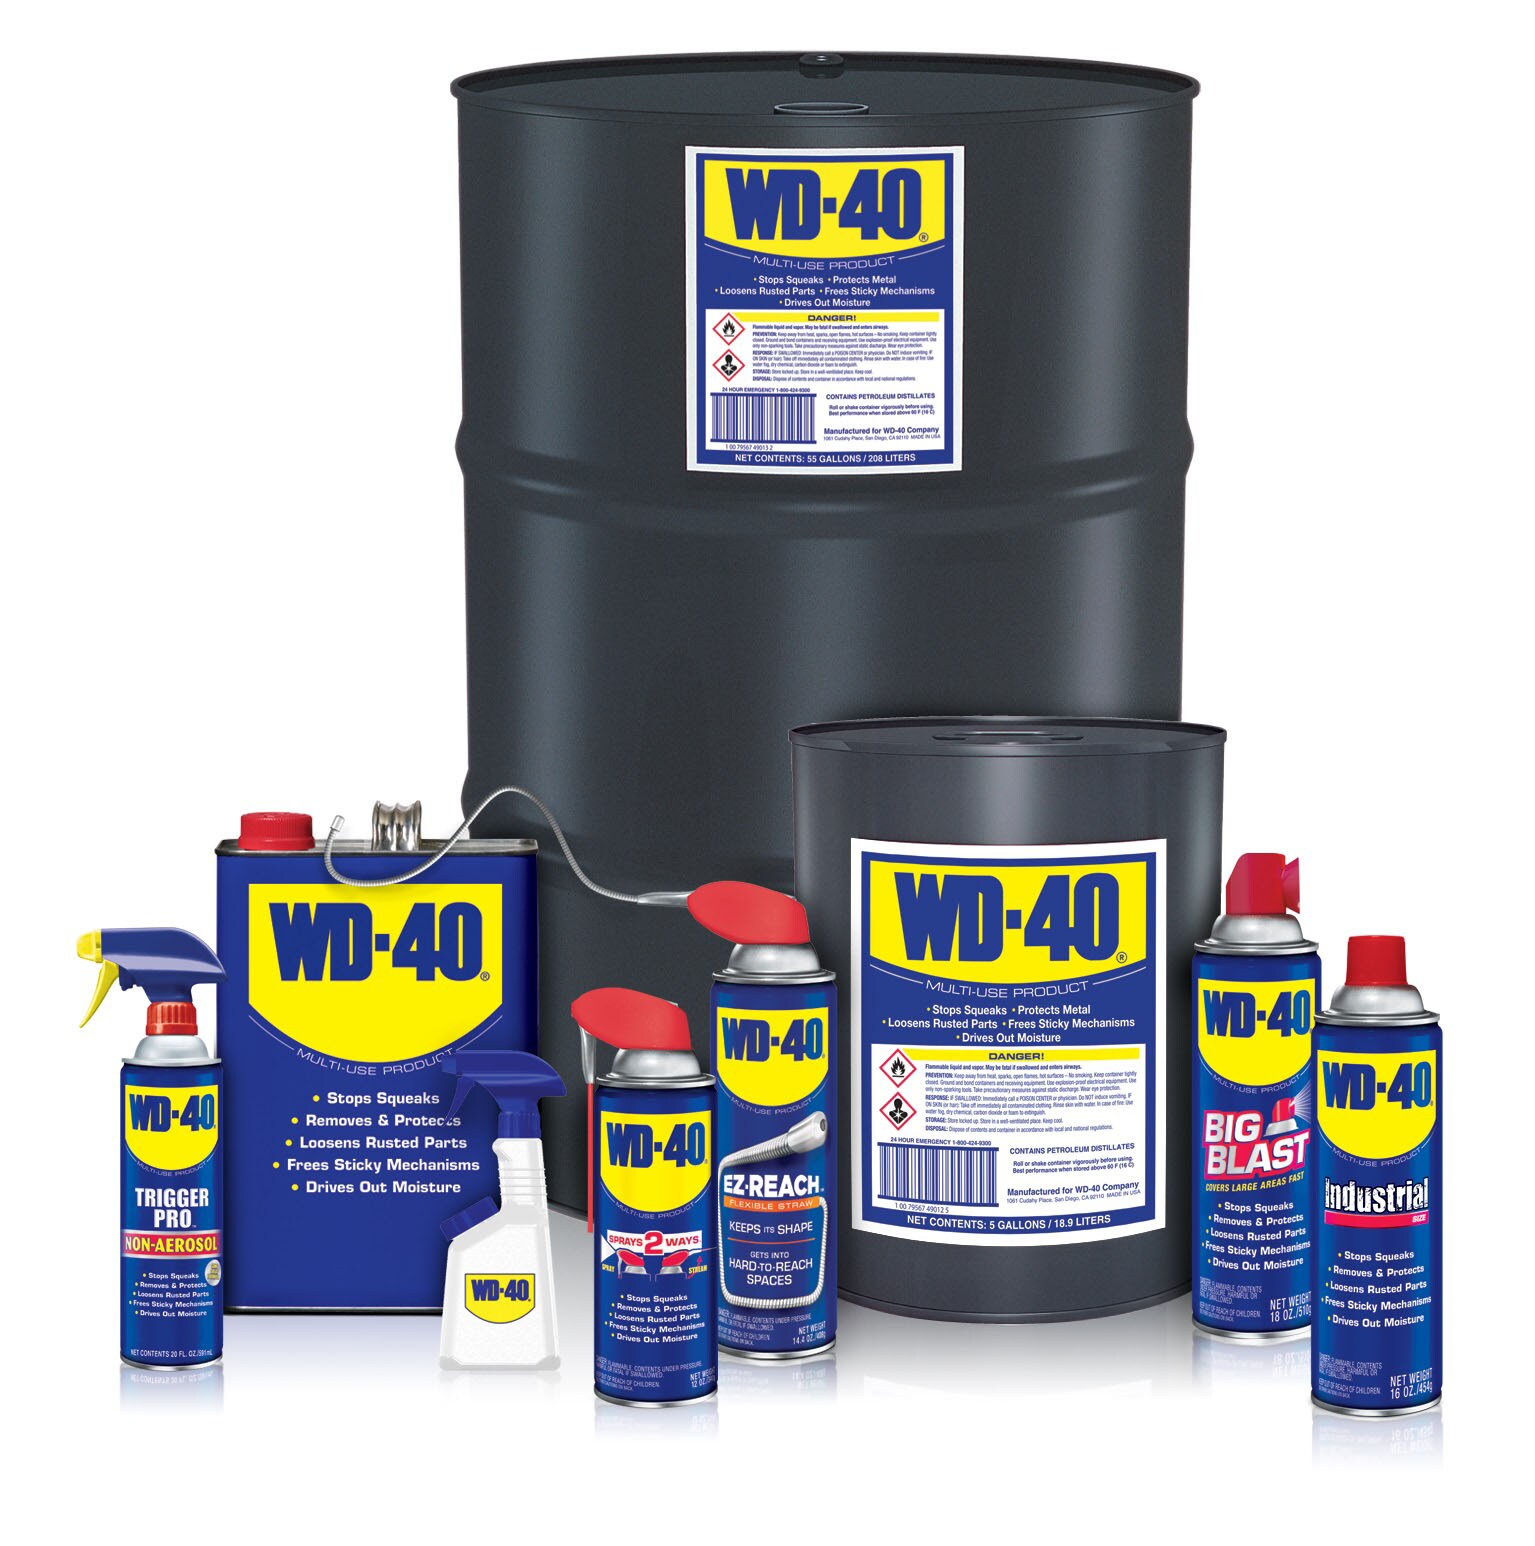 WD-40 5-Gallon (s) Multi-use Product at